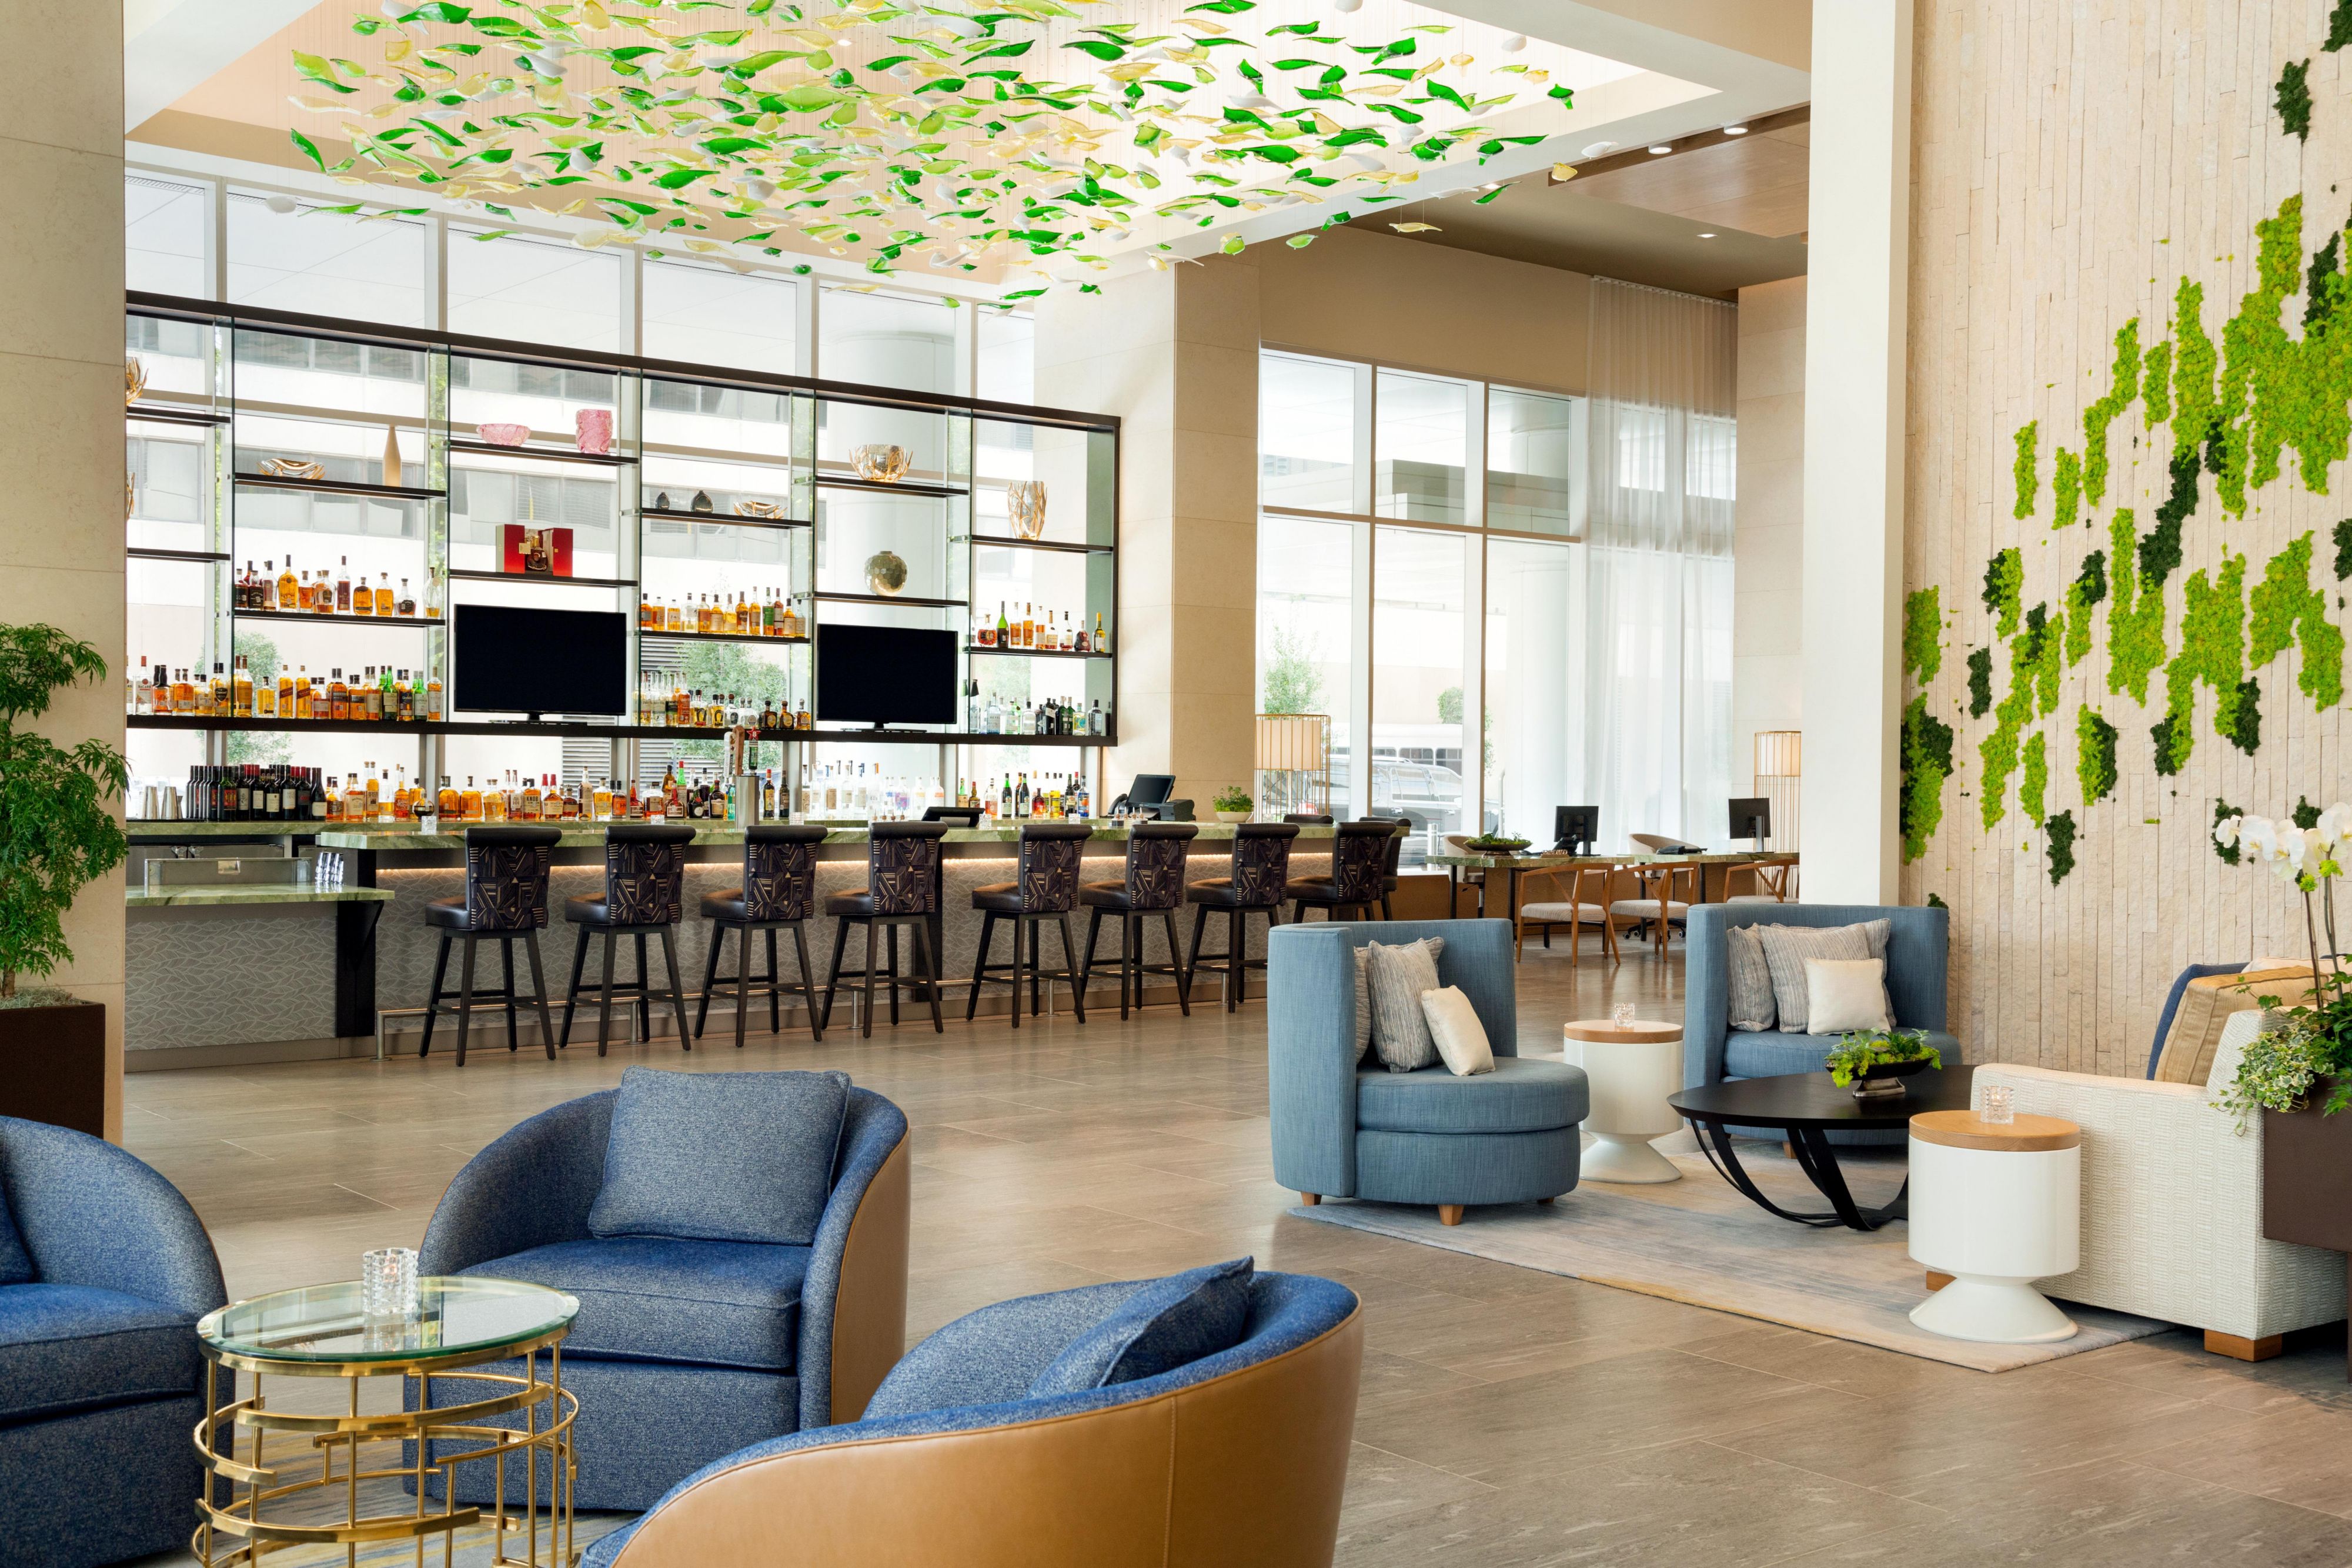 Join family, friends, or coworkers in our modern and airy lobby.